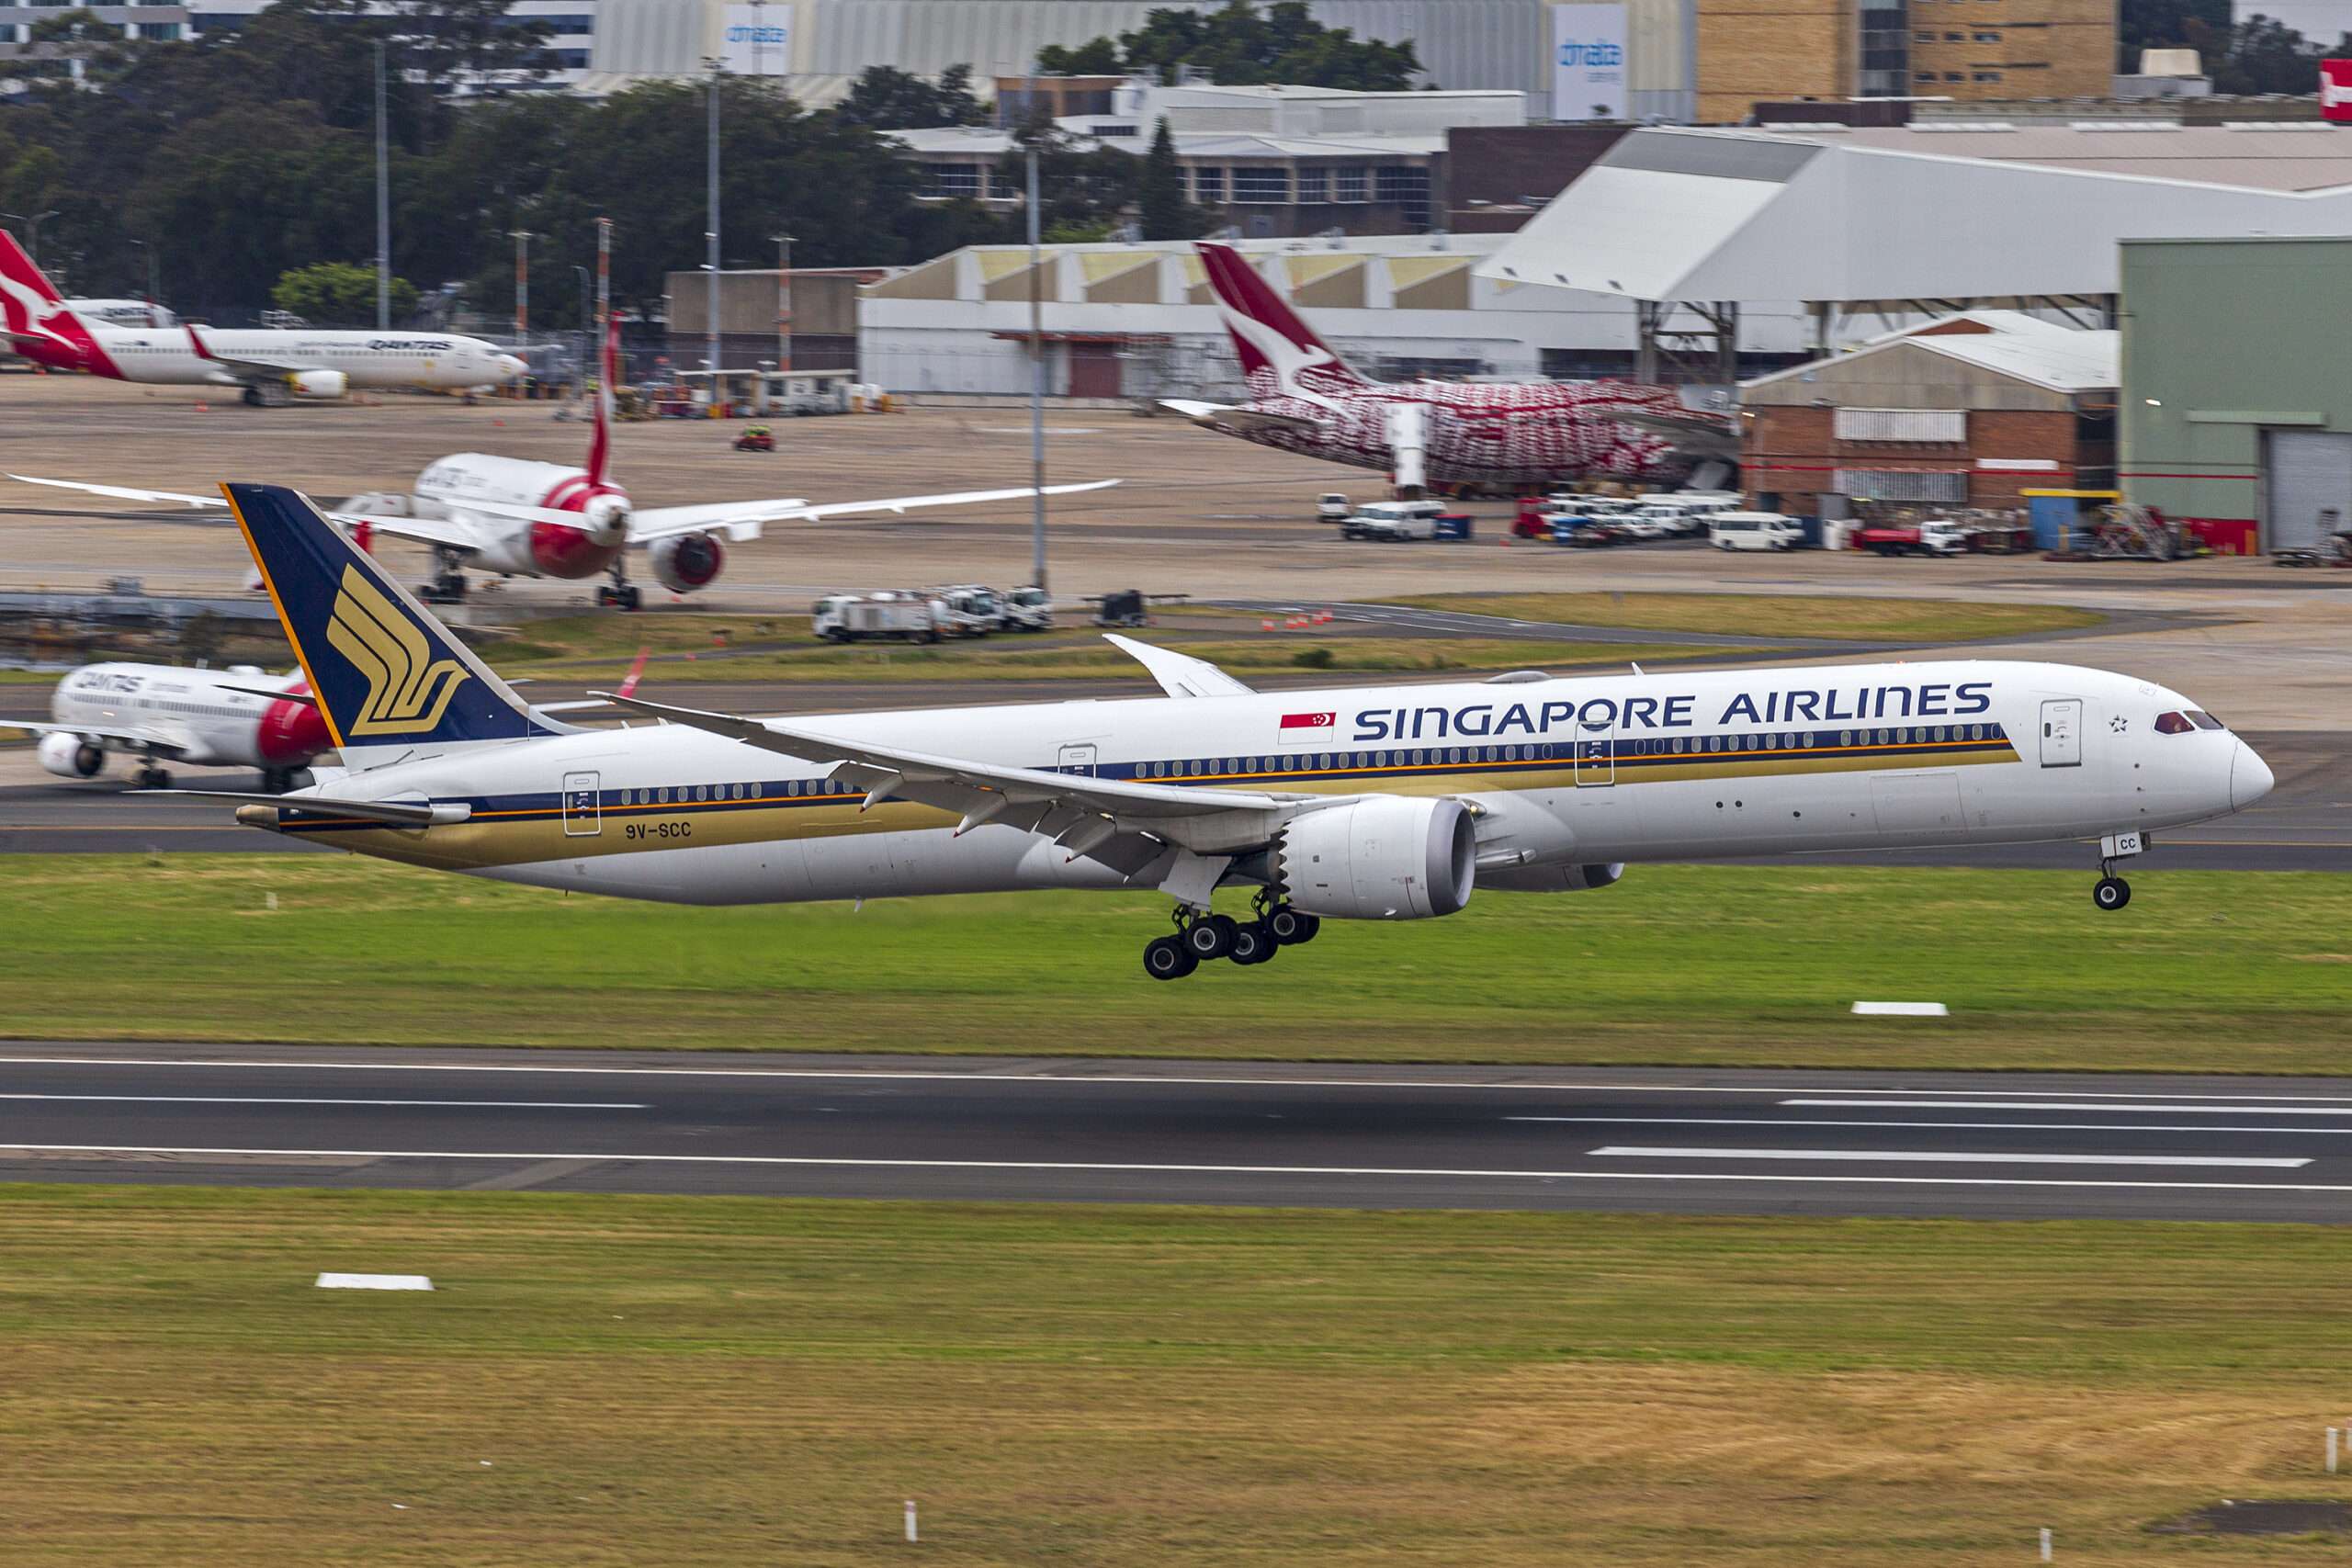 Staggering: Singapore Airlines To Add 6th Daily Bangkok Flight